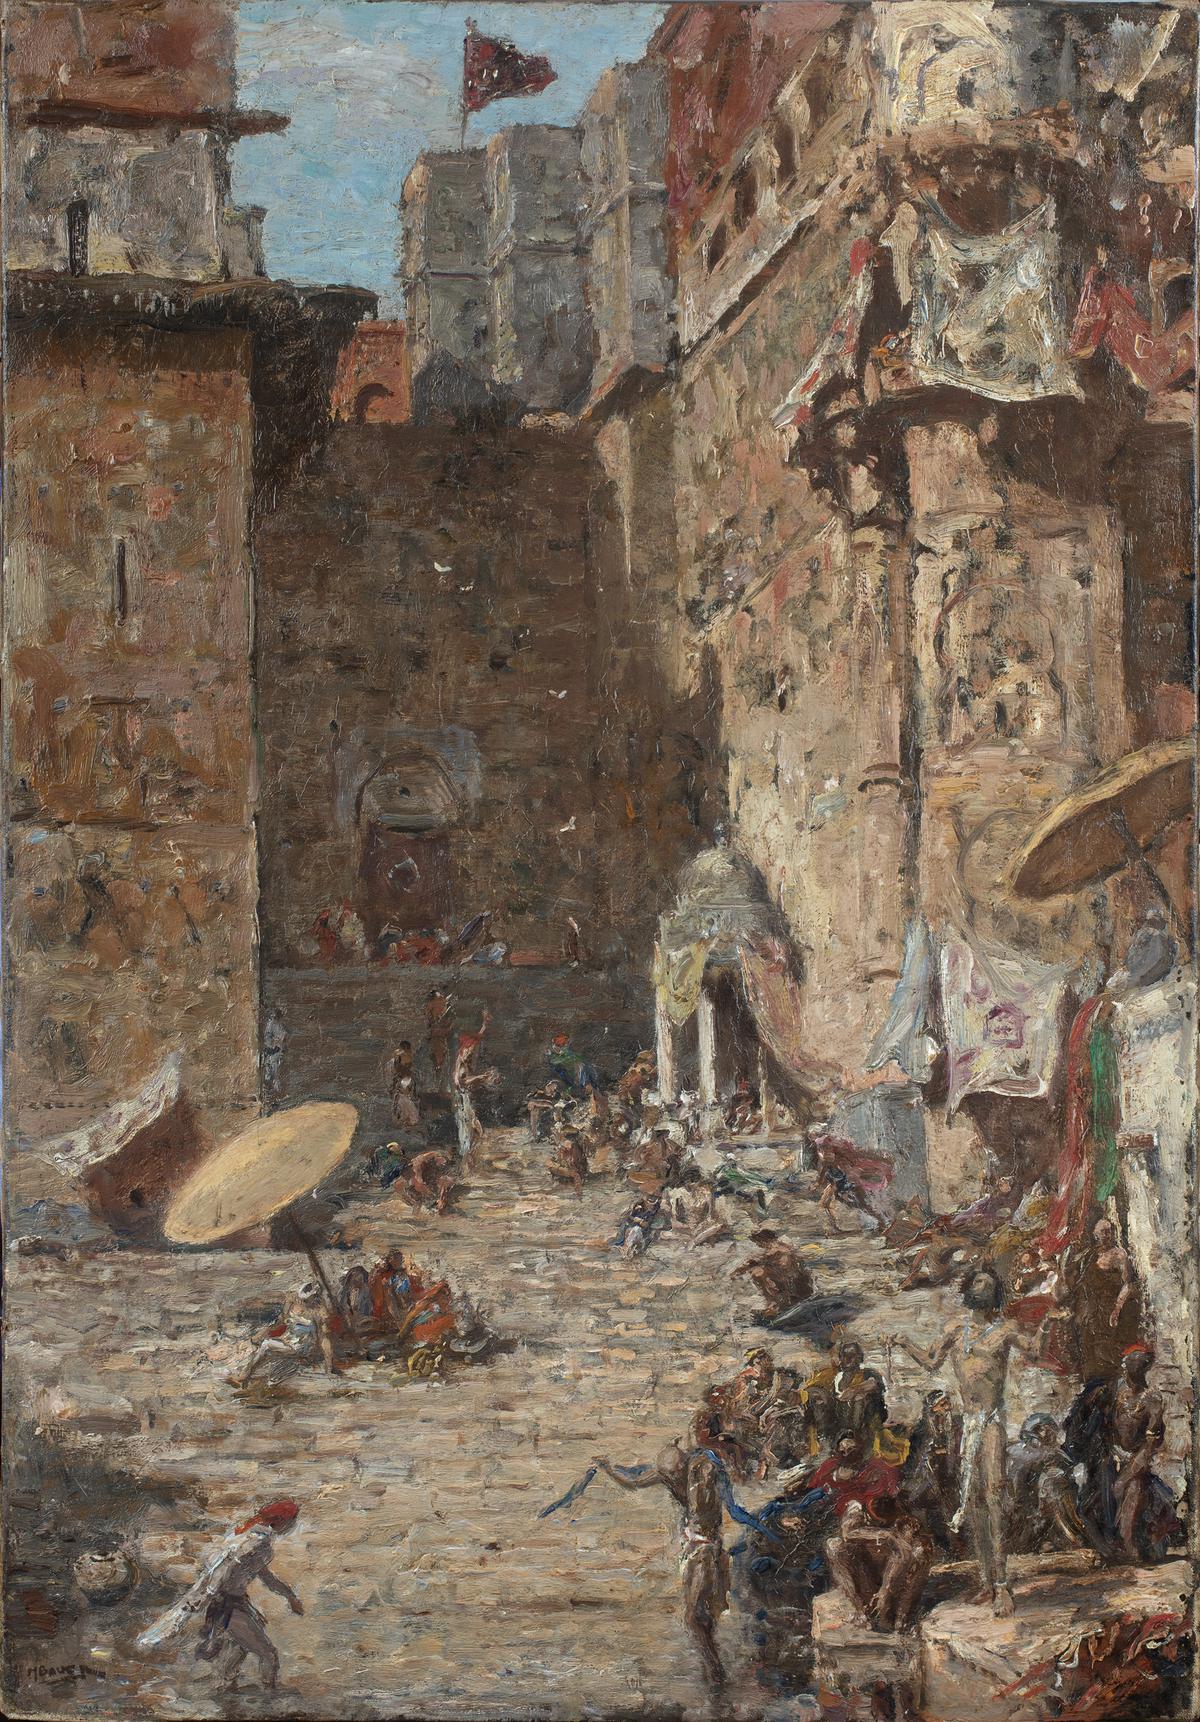 A Marius Bauer painting